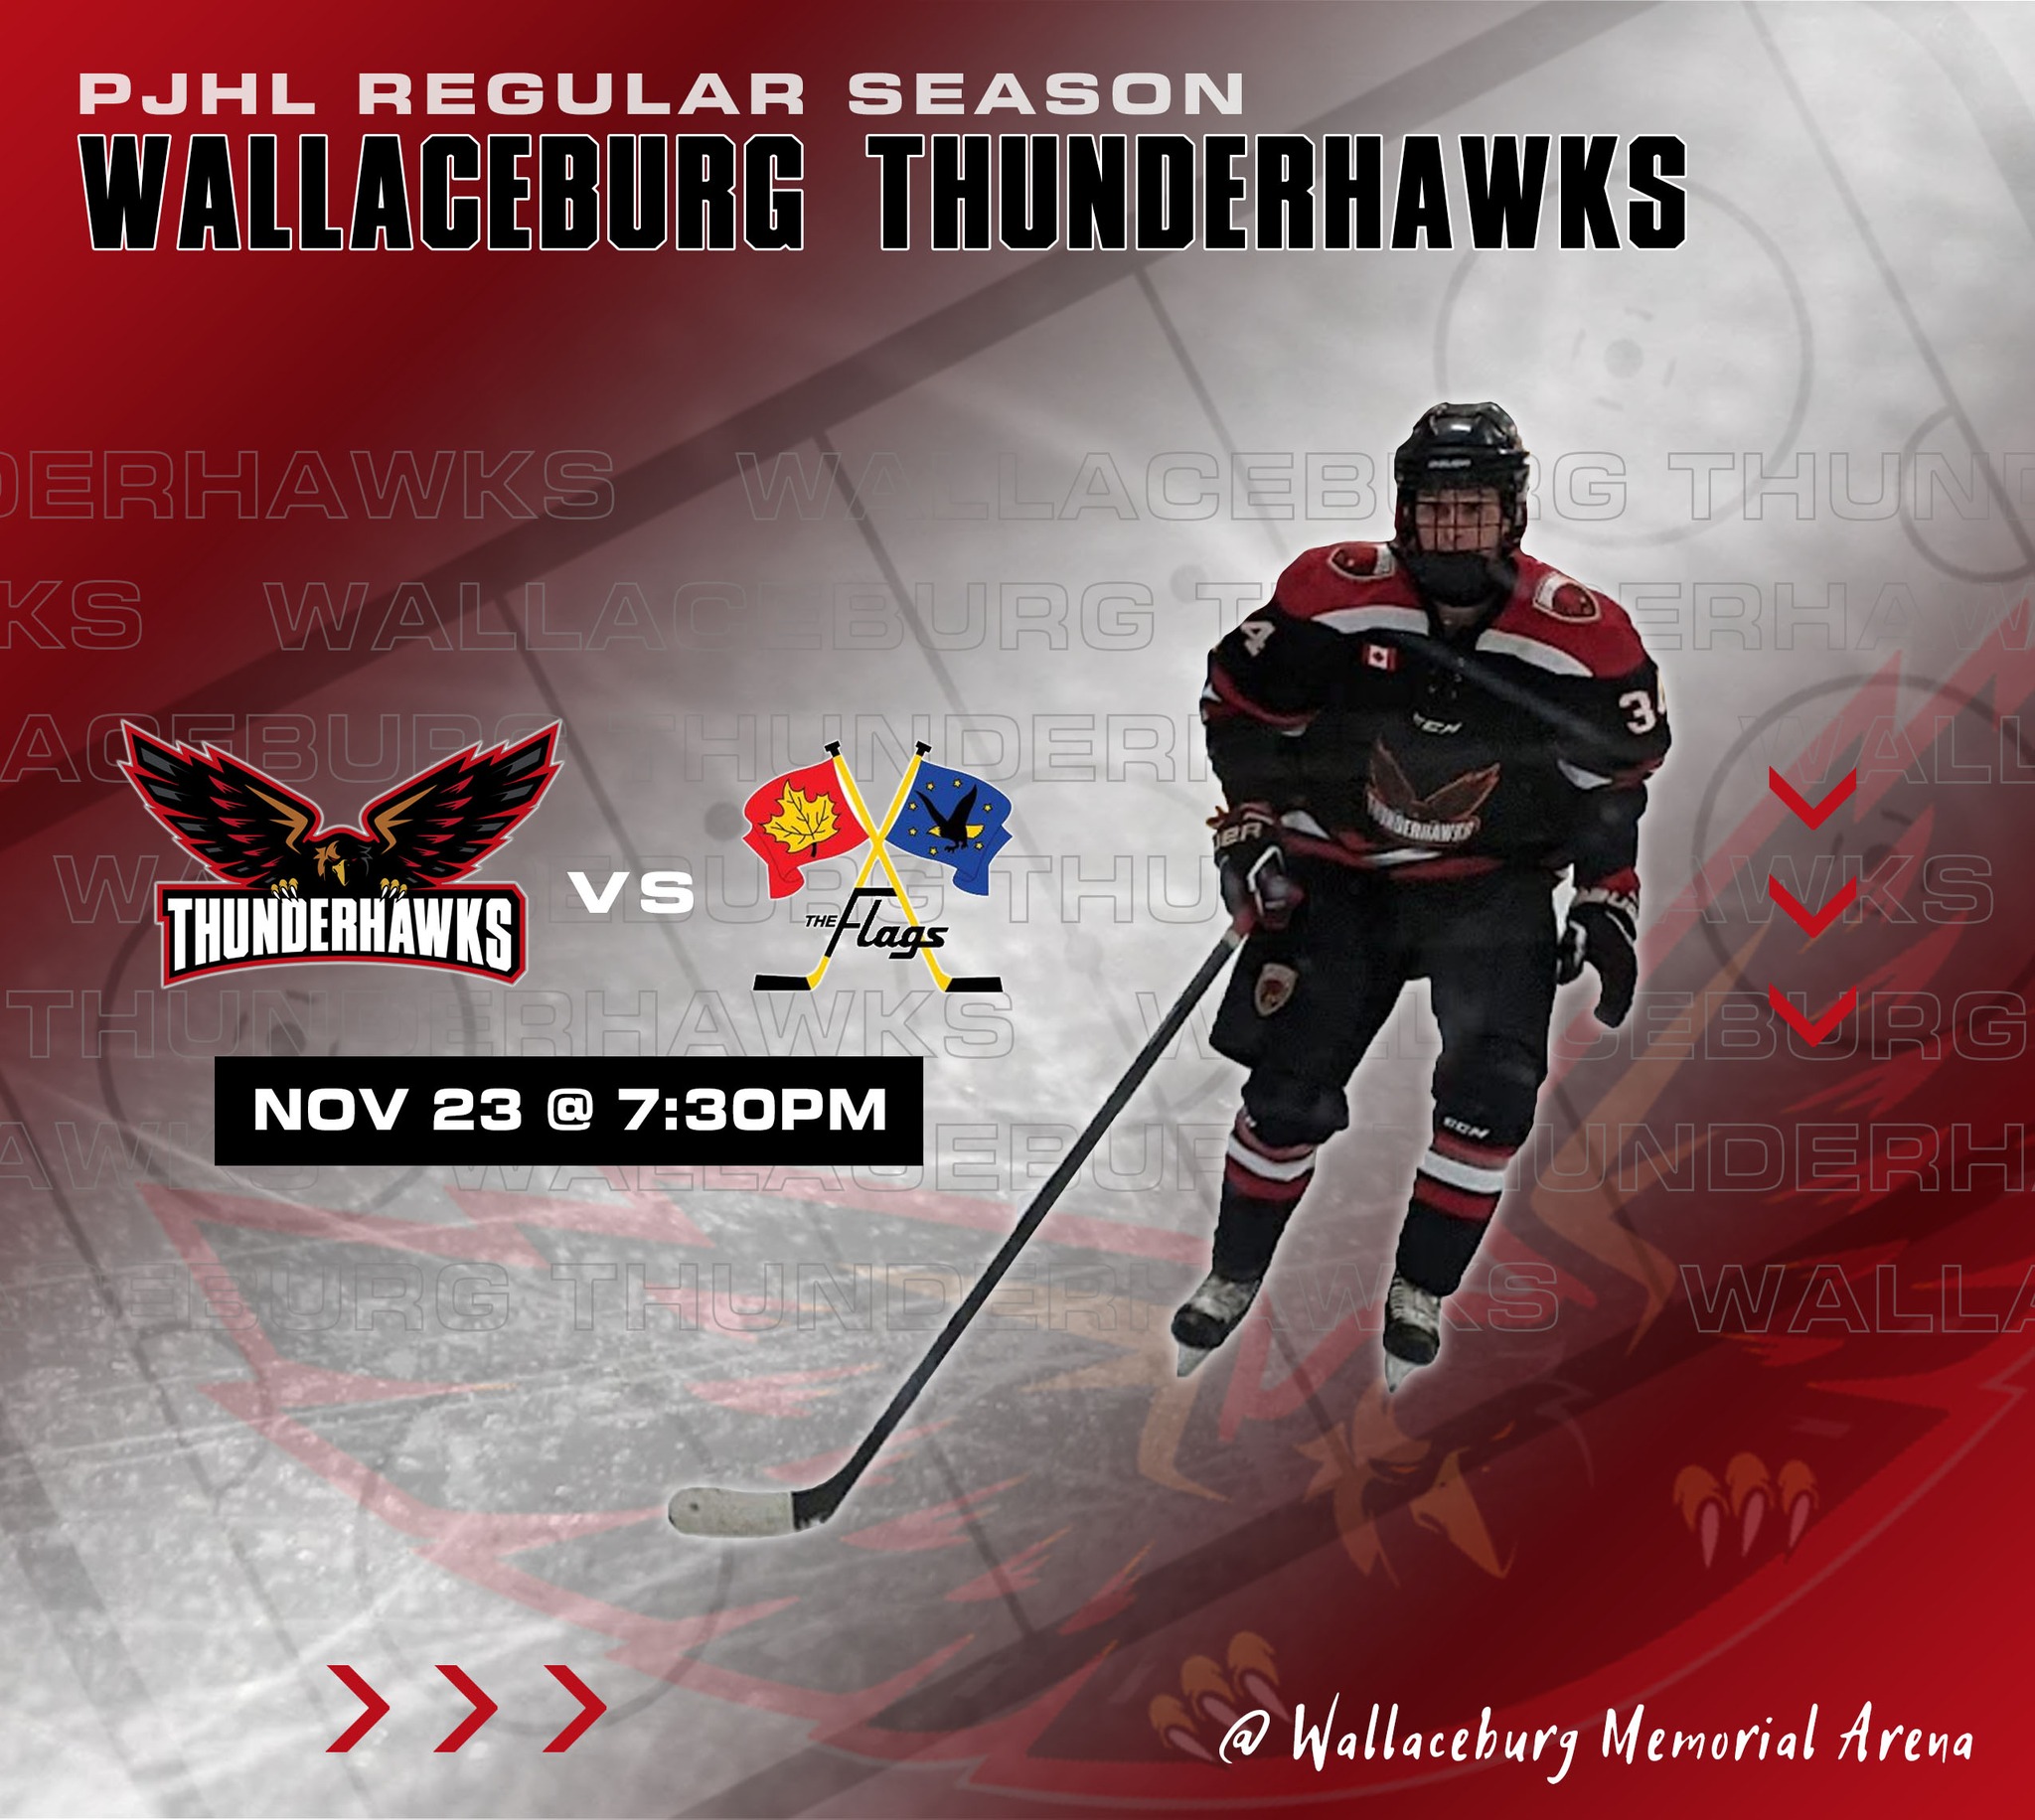 🚨It's GAME DAY!!🚨

Come cheer on your Wallaceburg Thunderhawks tonight as they take on the Mooretown Flags @ Wallaceburg Memorial Arena.

🏒Puck drops at 7:30pm

#pjhl #hockey #Thunderhawks #hawksnest